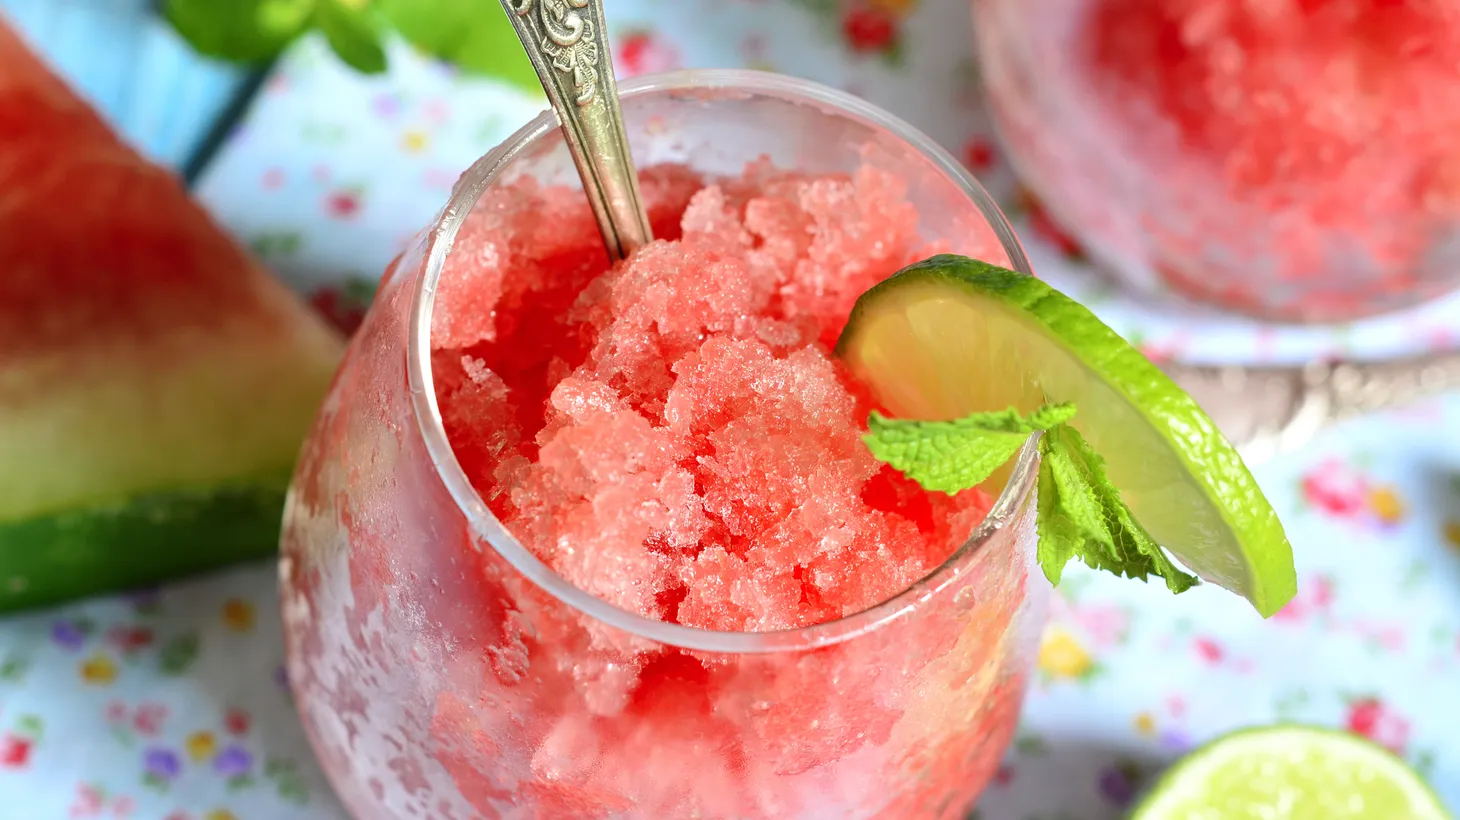 Watermelon granita is a quick way to cool yourself off on a hot day.